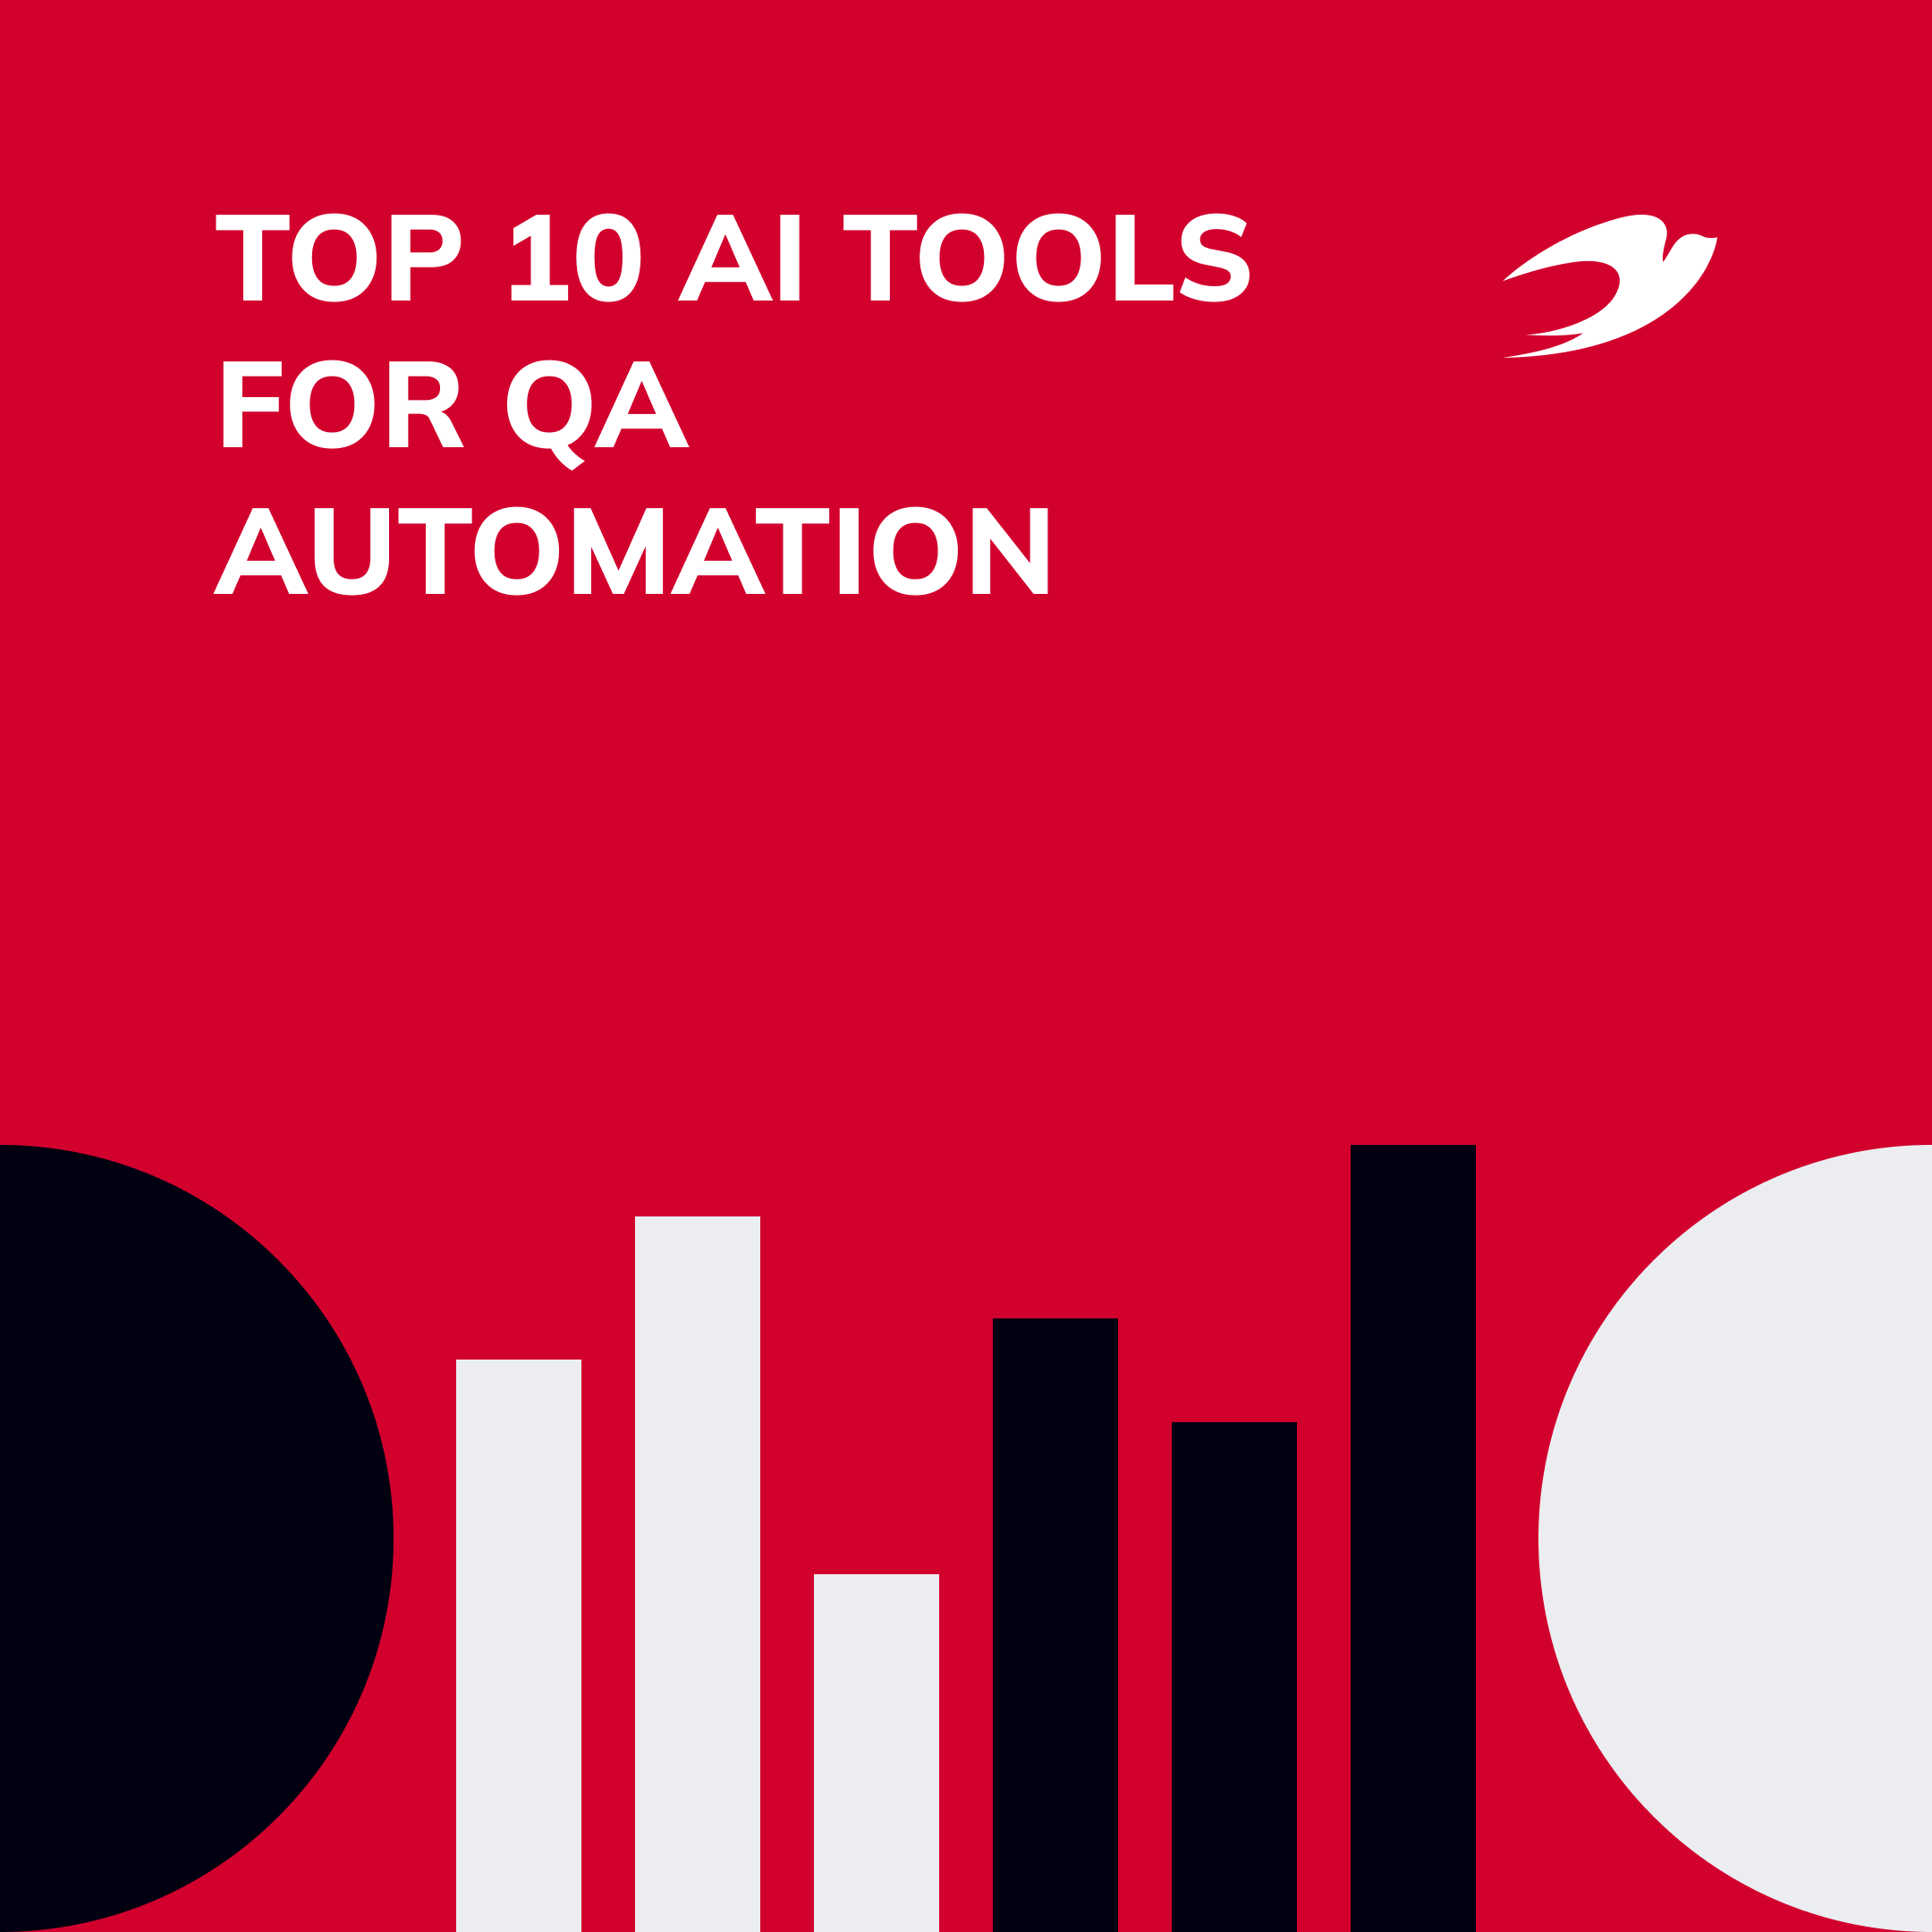 Top 10 AI Tools for QA Automation